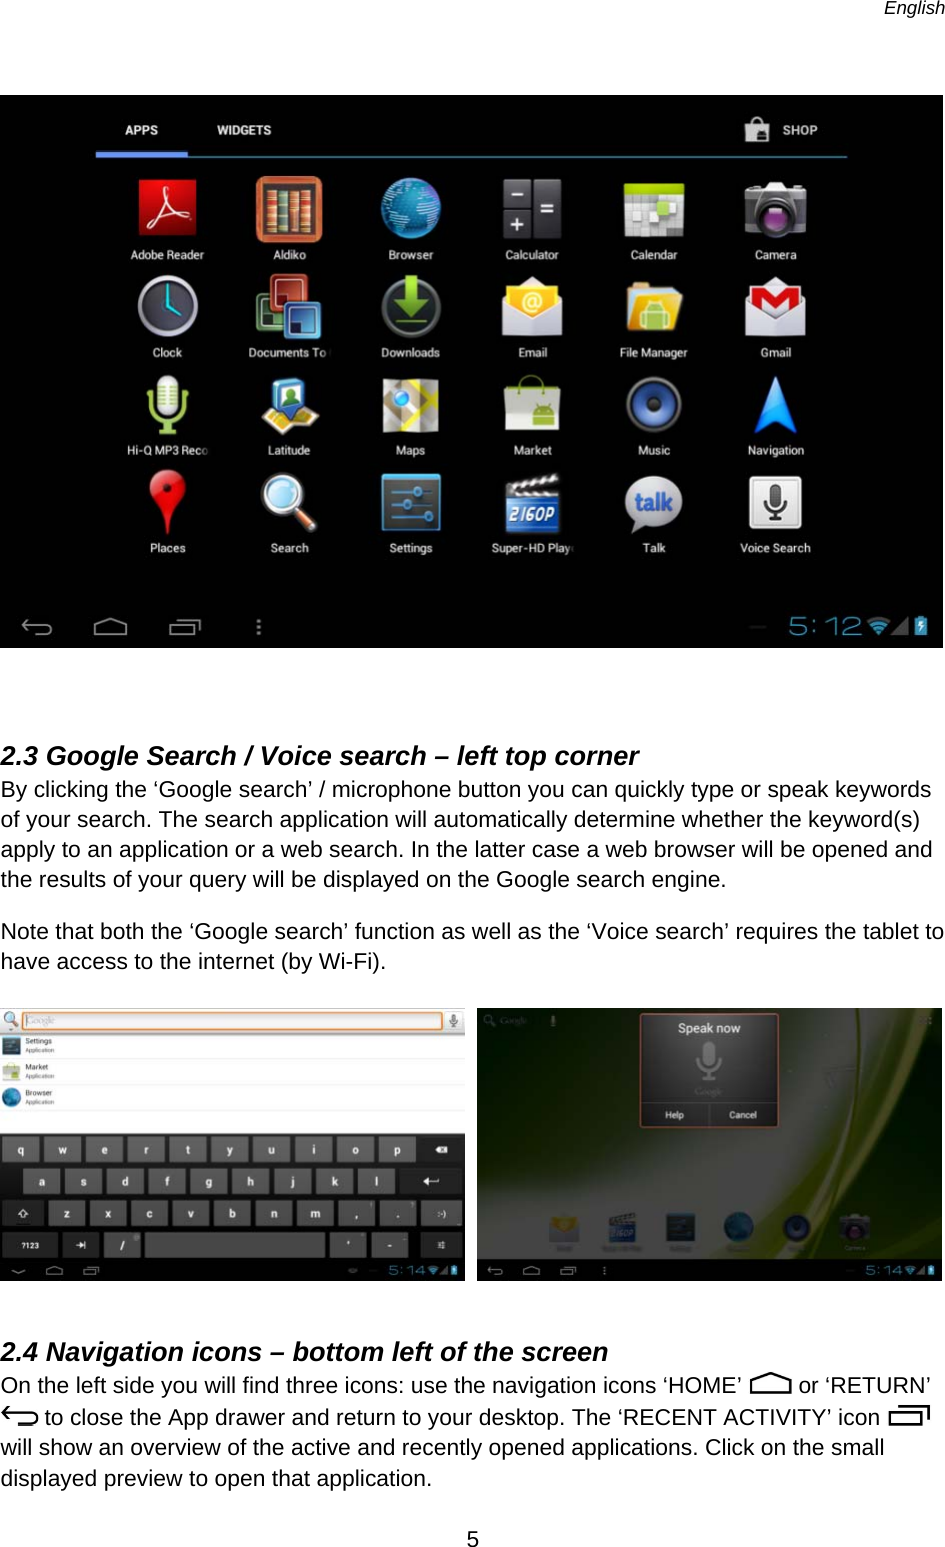   English   5    2.3 Google Search / Voice search – left top corner By clicking the ‘Google search’ / microphone button you can quickly type or speak keywords of your search. The search application will automatically determine whether the keyword(s) apply to an application or a web search. In the latter case a web browser will be opened and the results of your query will be displayed on the Google search engine. Note that both the ‘Google search’ function as well as the ‘Voice search’ requires the tablet to have access to the internet (by Wi-Fi).       2.4 Navigation icons – bottom left of the screen On the left side you will find three icons: use the navigation icons ‘HOME’   or ‘RETURN’  to close the App drawer and return to your desktop. The ‘RECENT ACTIVITY’ icon   will show an overview of the active and recently opened applications. Click on the small displayed preview to open that application. 